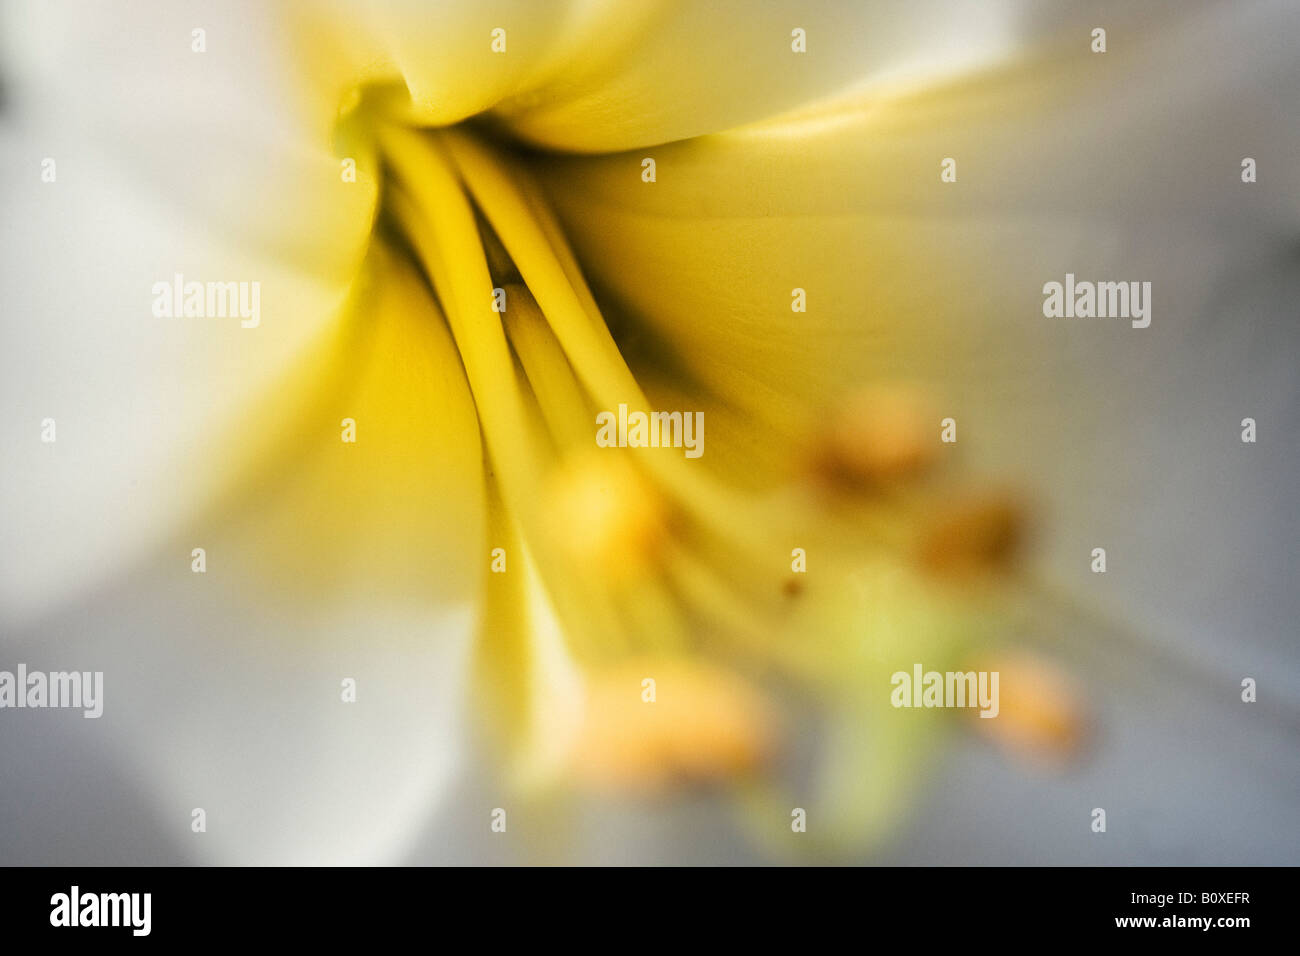 Close up of a white lily with yellow centre Stock Photo